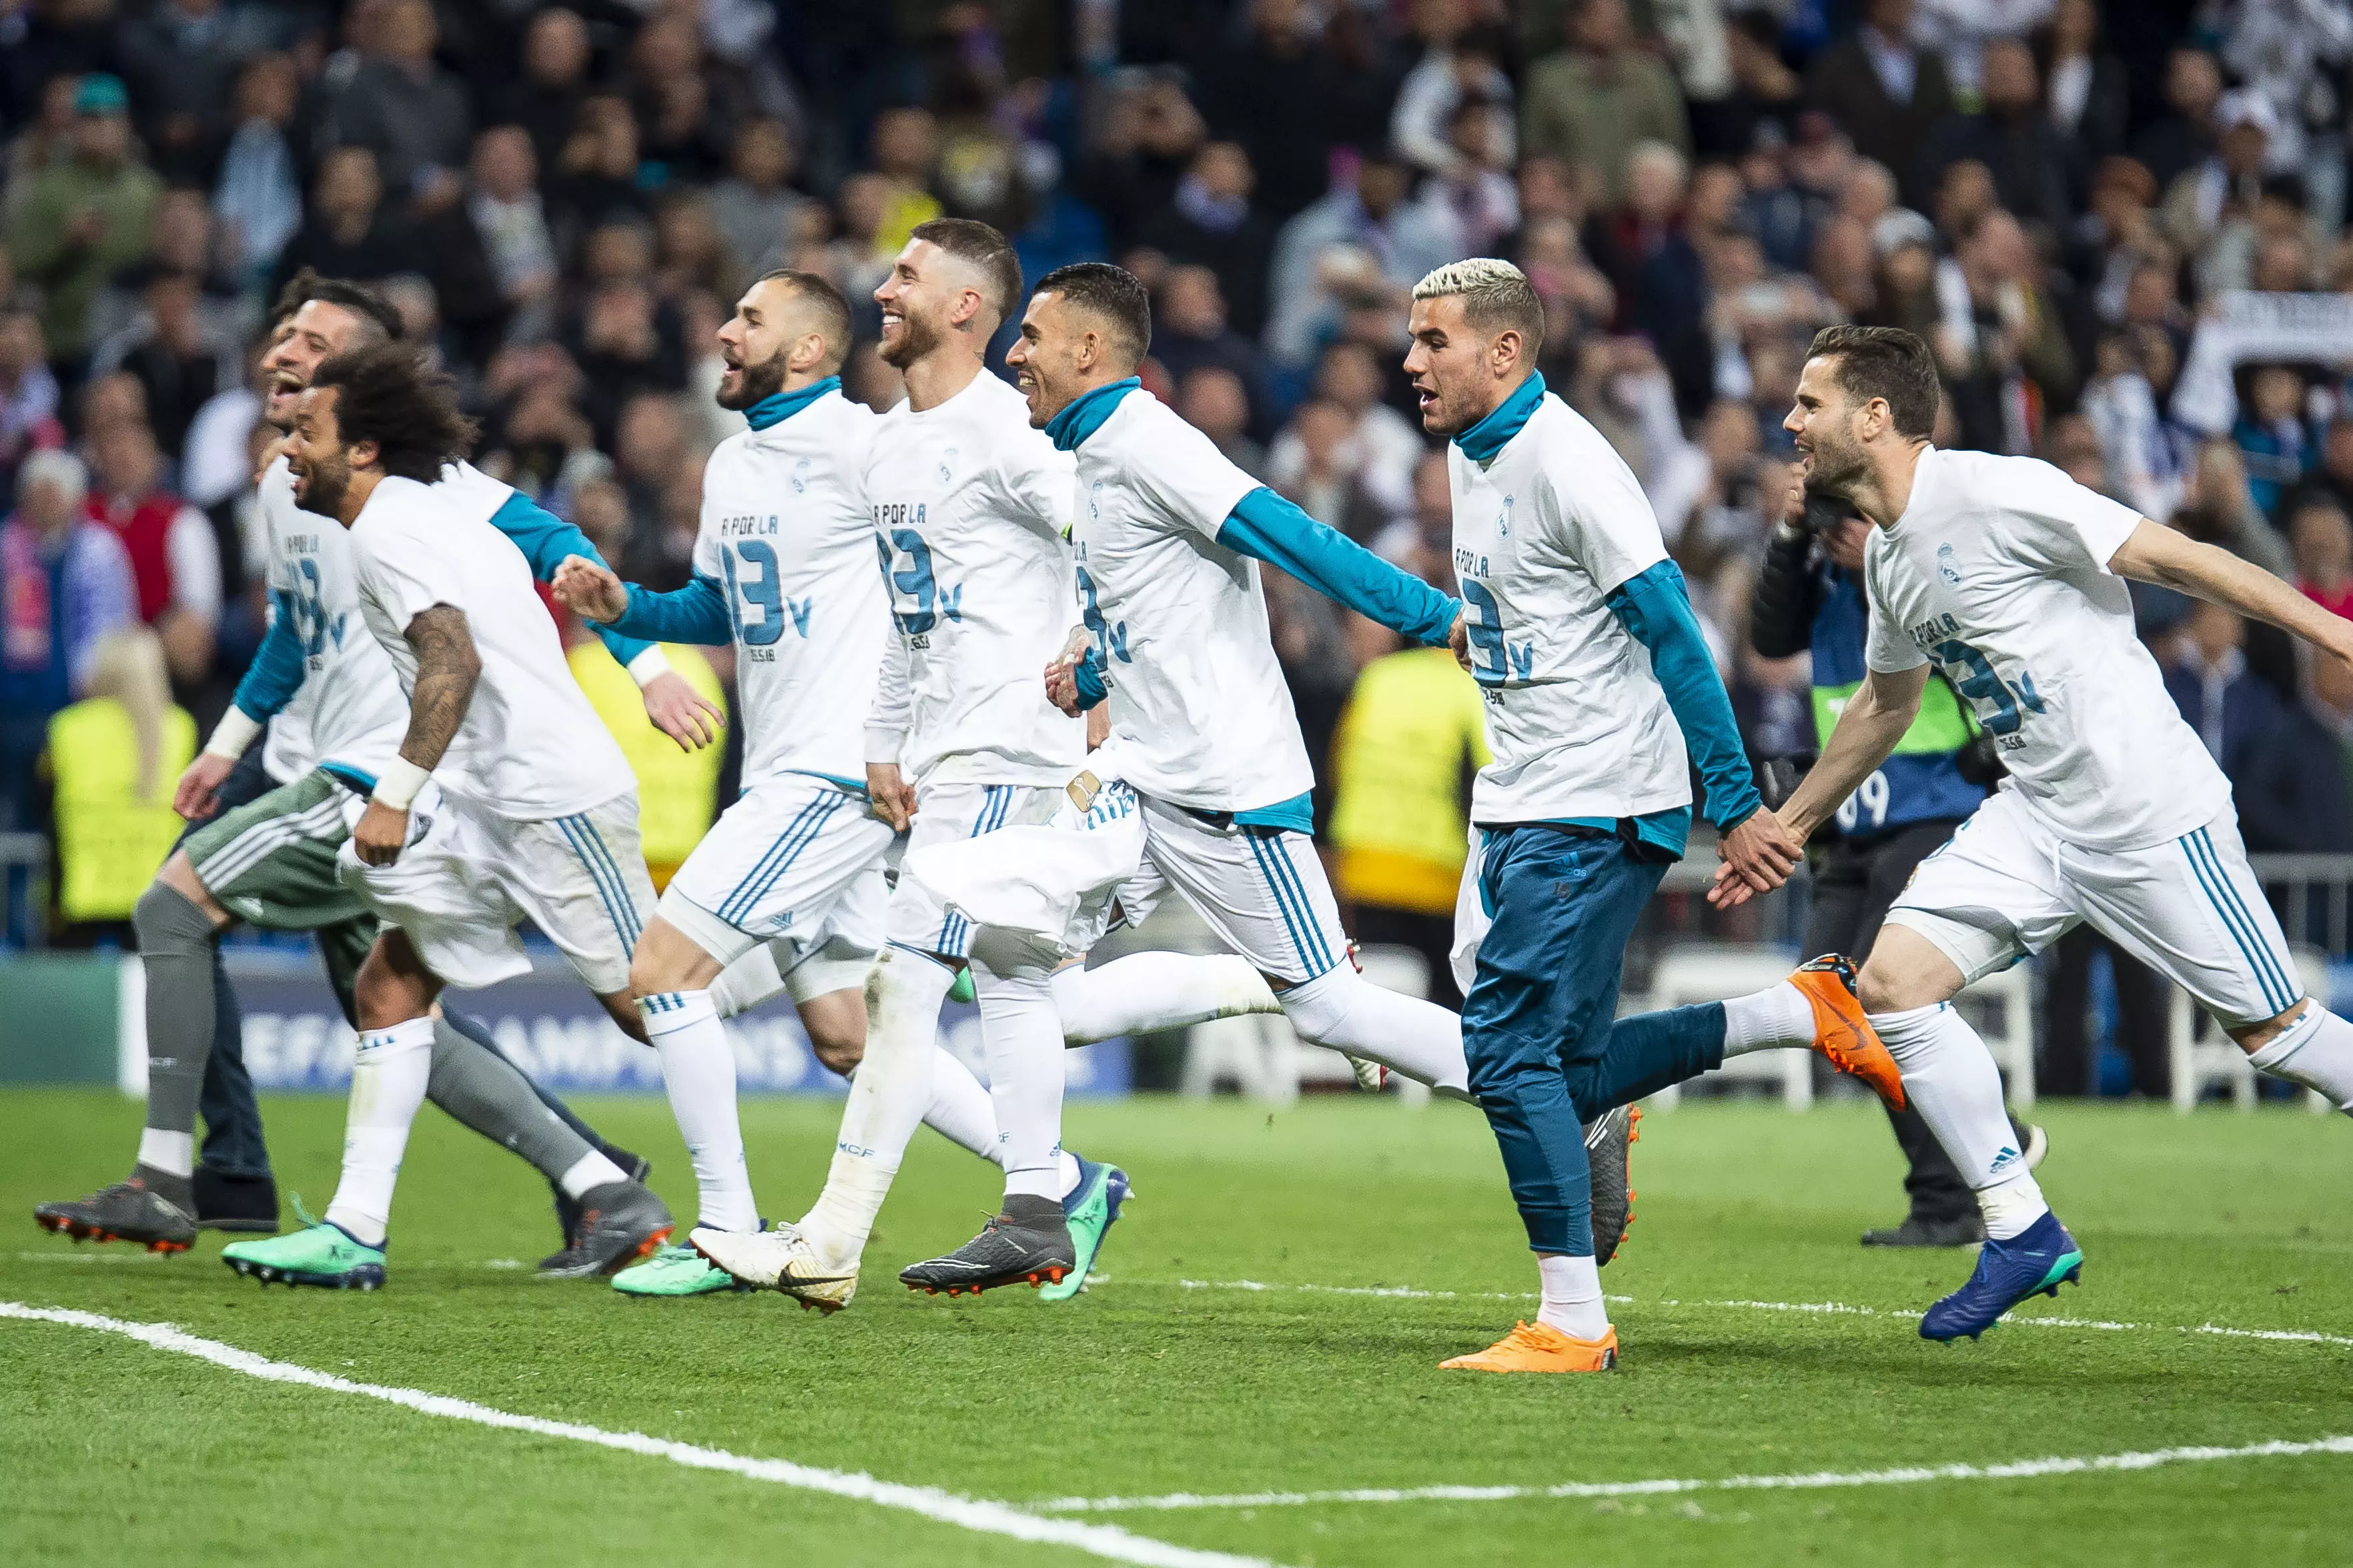 Real Madrid team celebrate advancing to the final. Image: PA